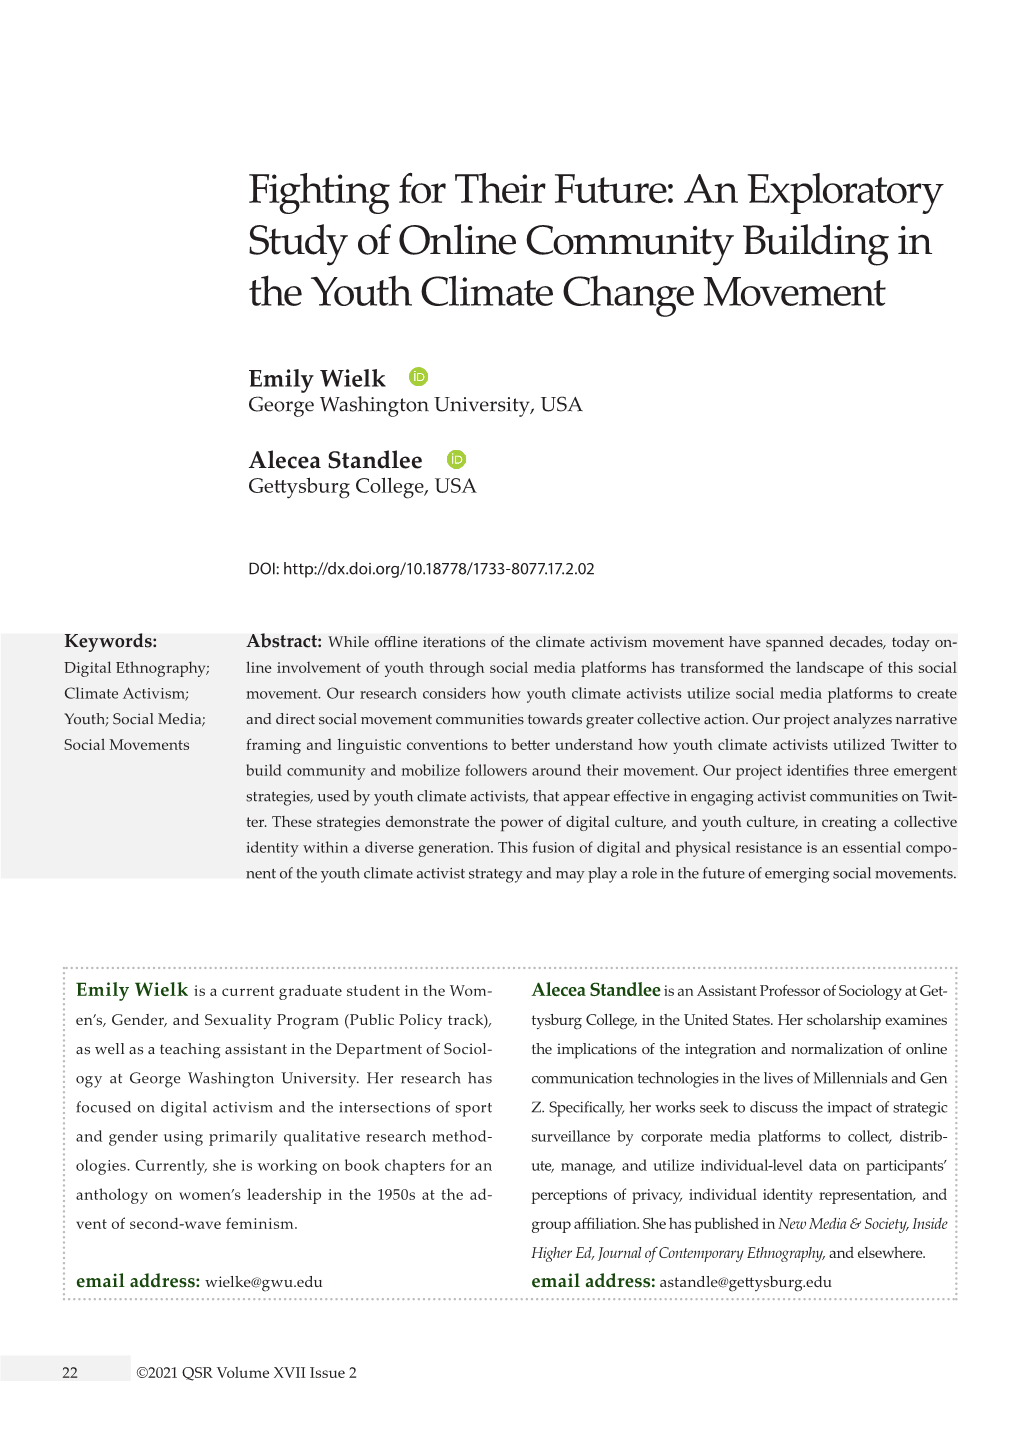 An Exploratory Study of Online Community Building in the Youth Climate Change Movement